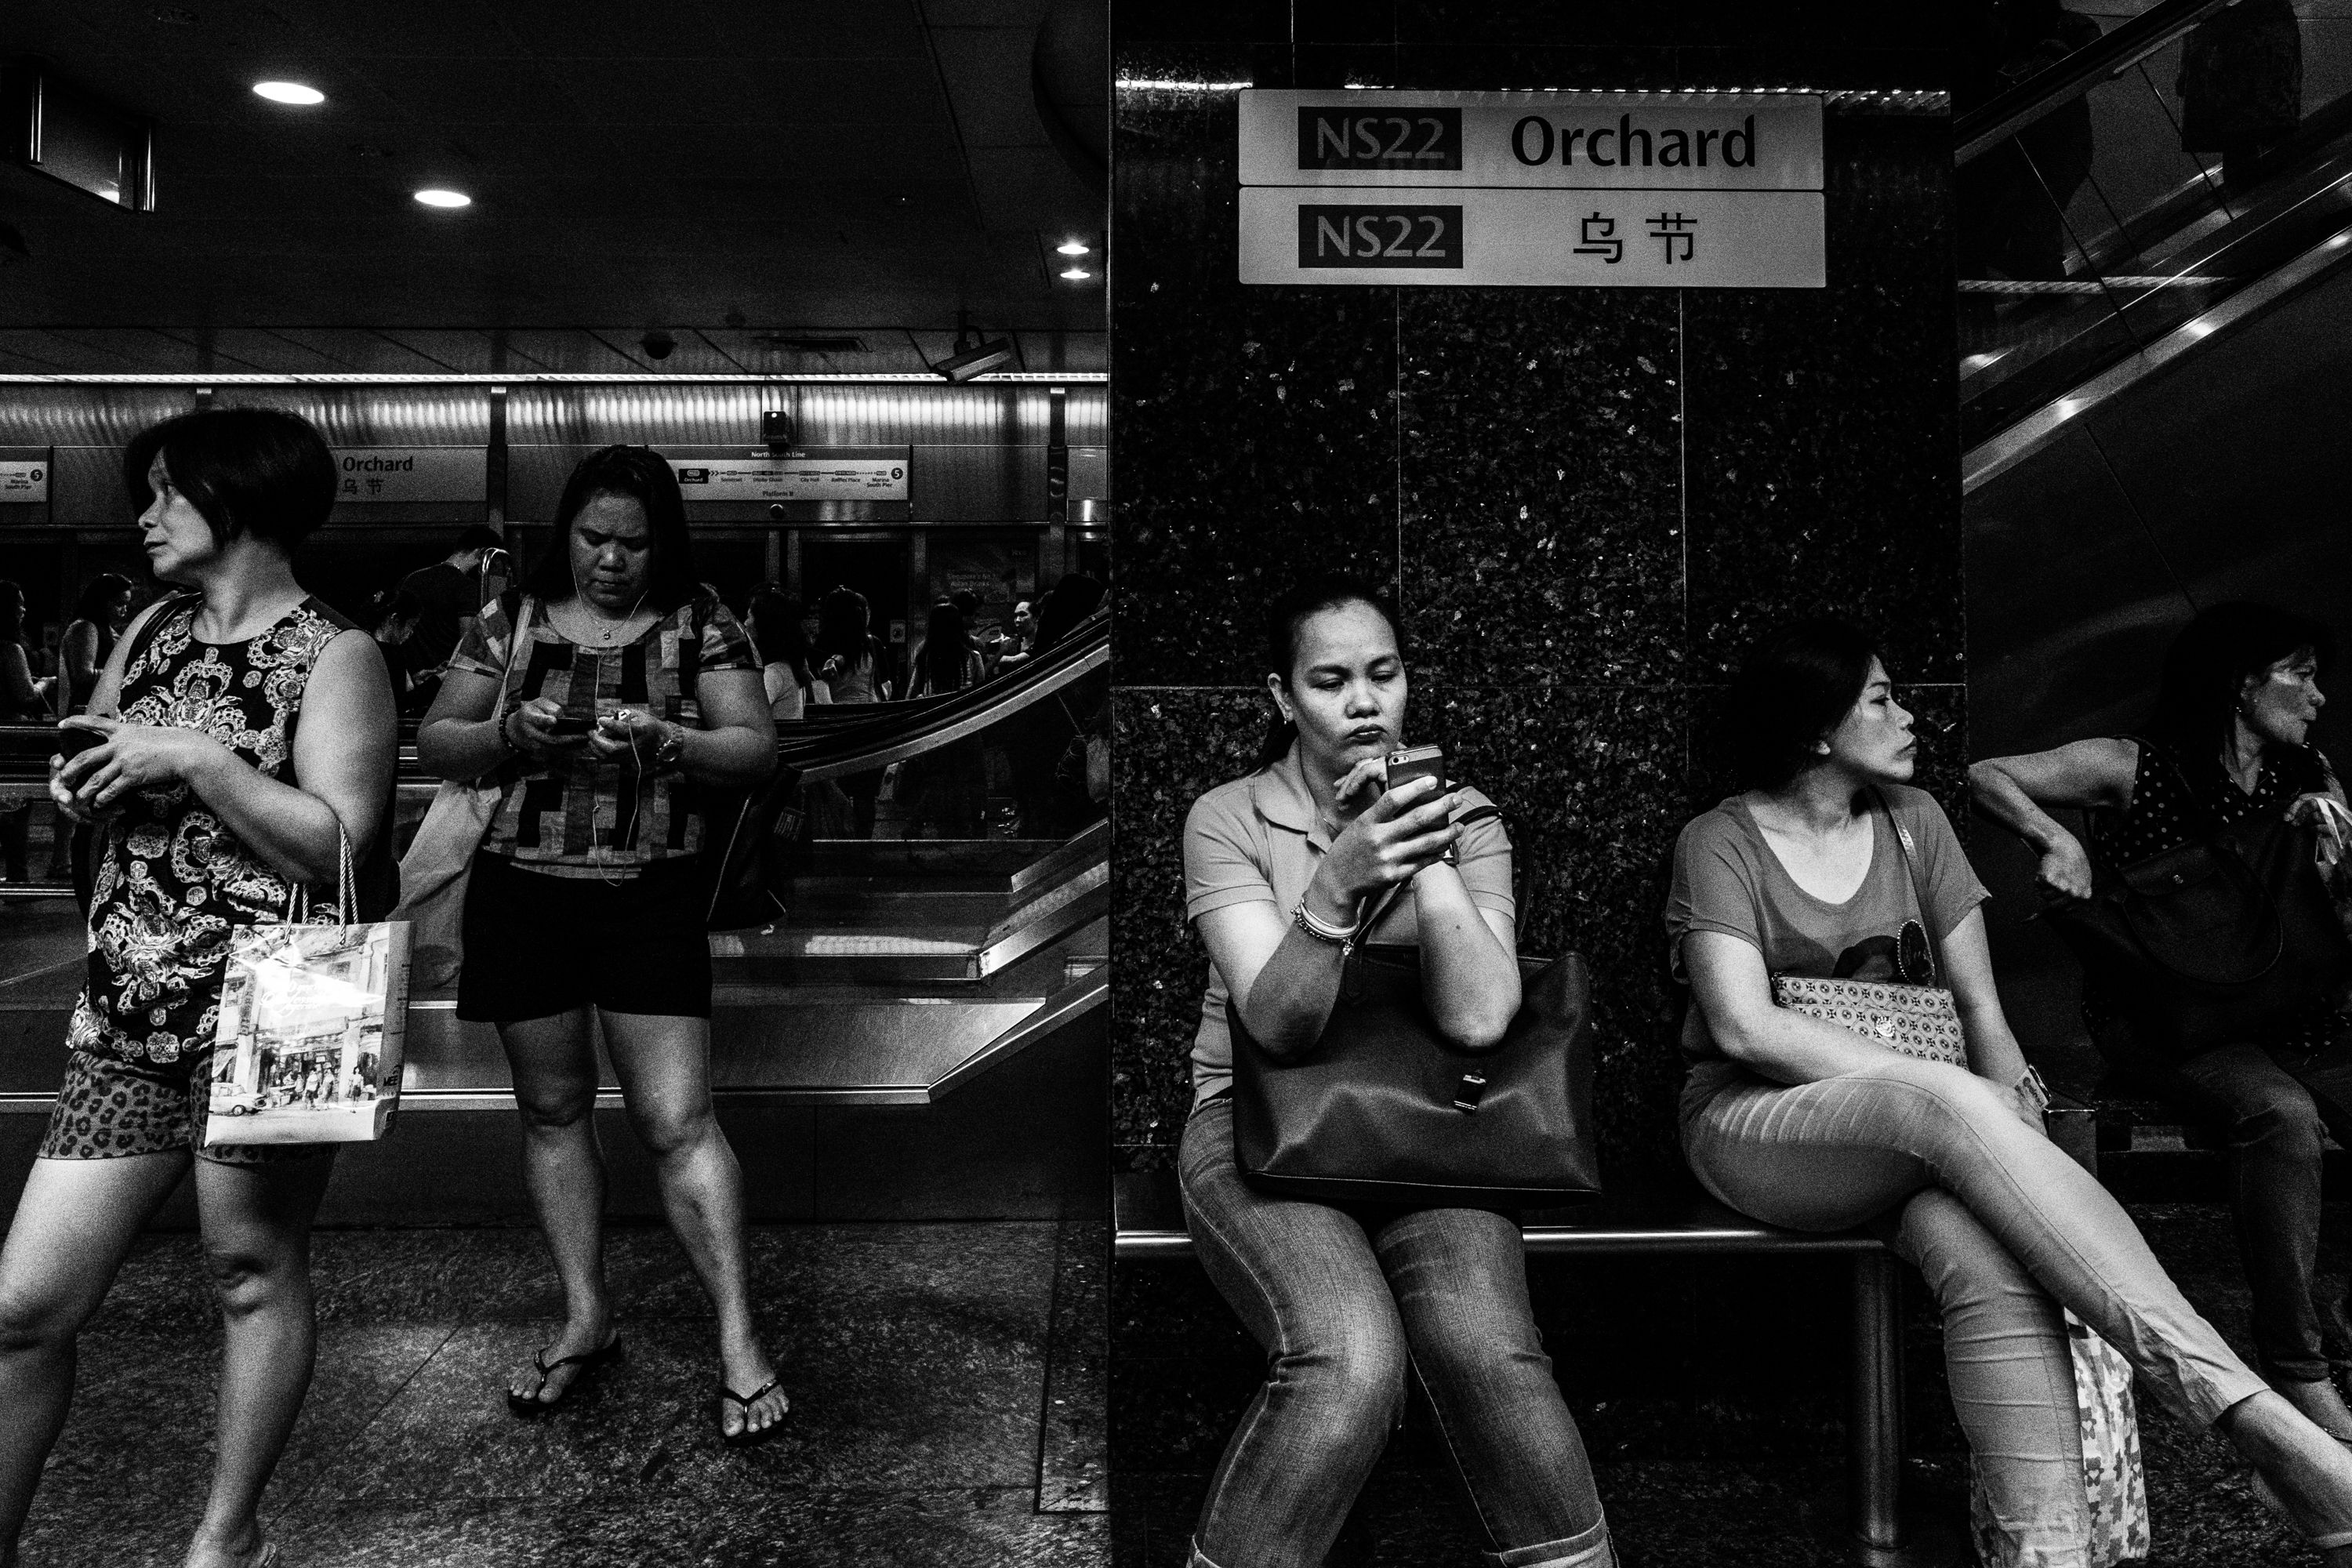 Migrant workers waiting for the train in Orchard, Singapore. Image by Xyza Bacani. Singapore, 2016.